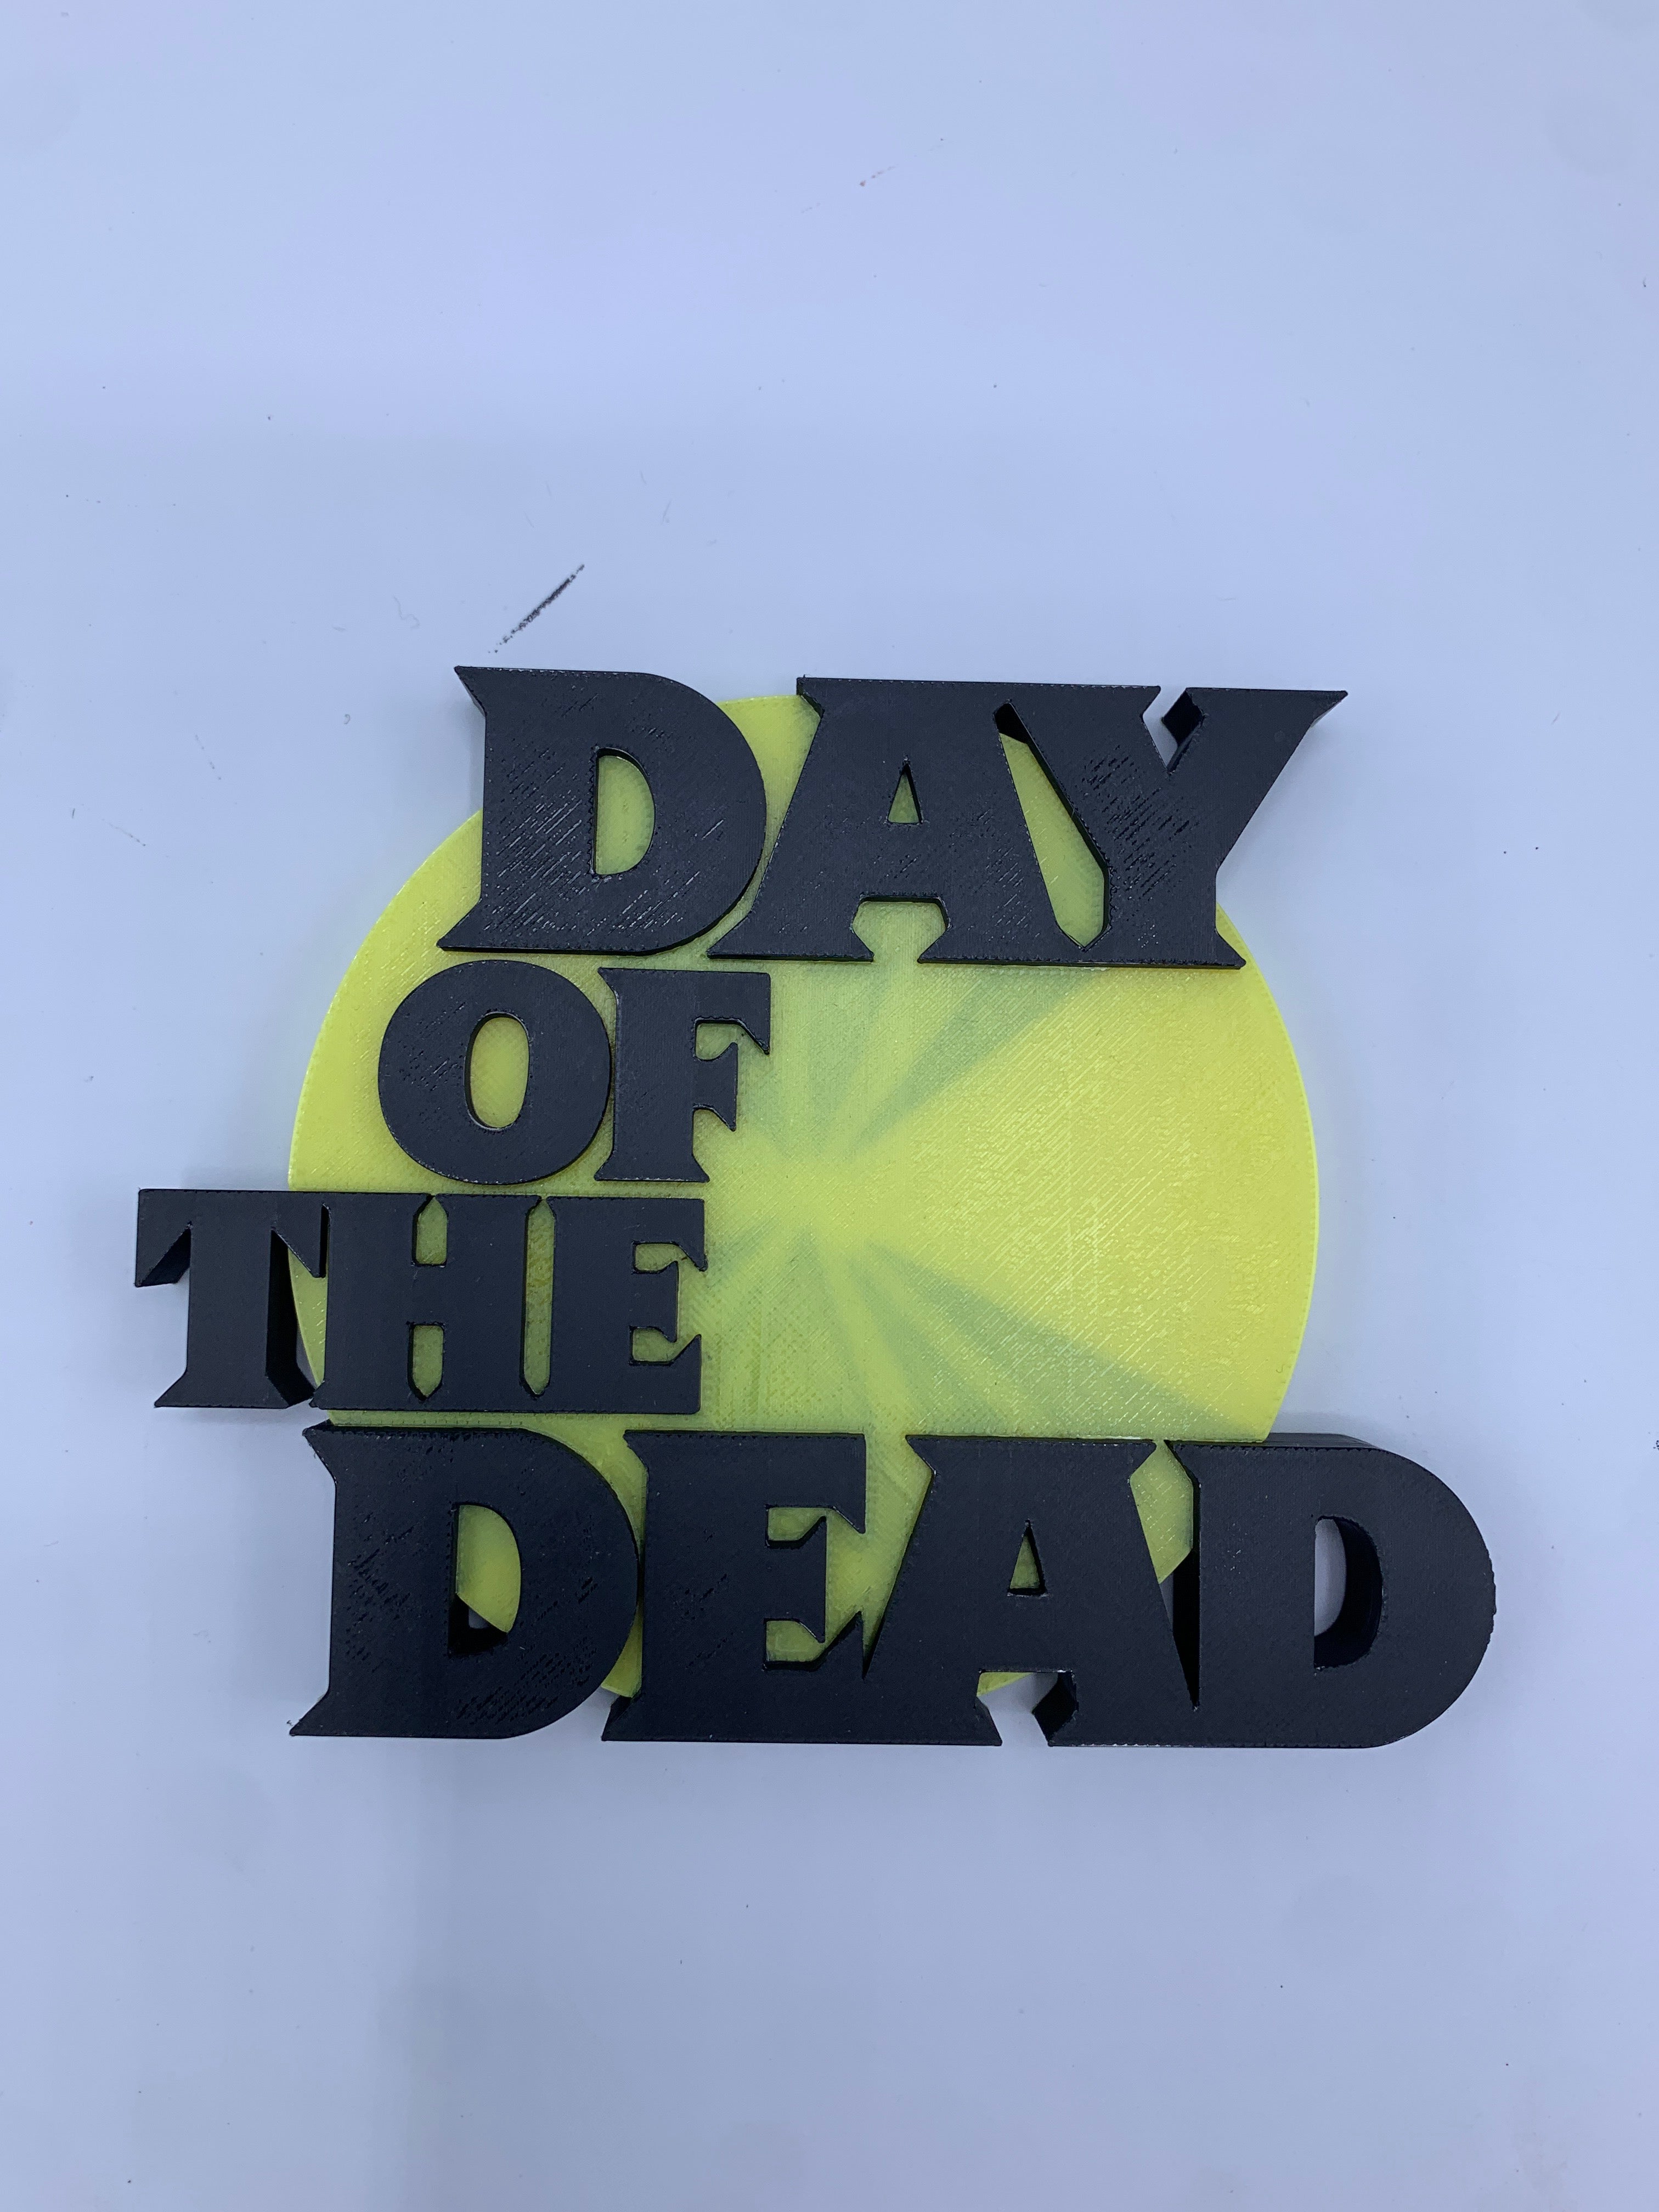 Day of the dead sign